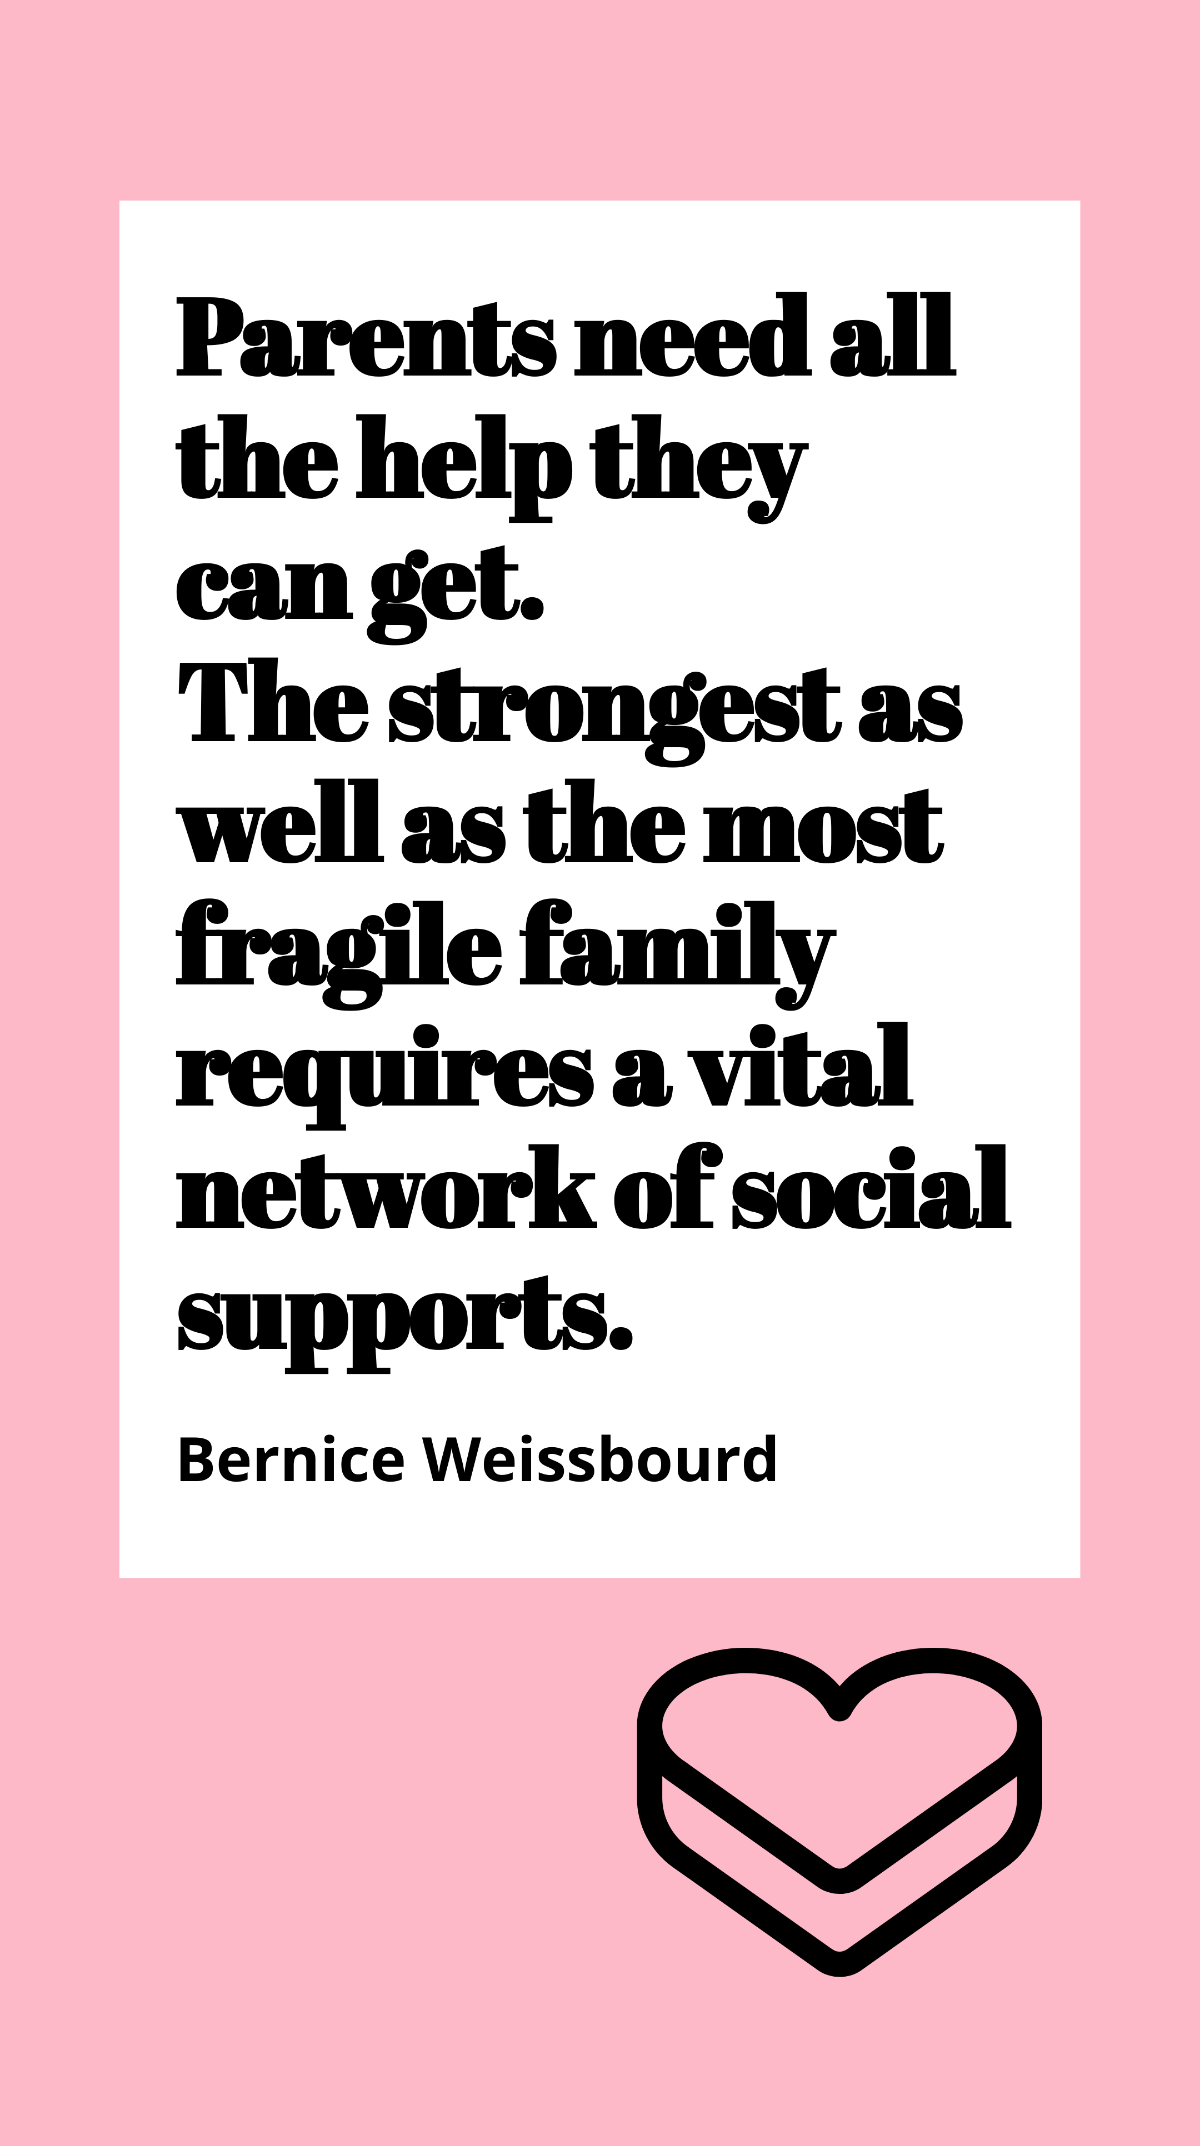 Bernice Weissbourd - Parents need all the help they can get. The strongest as well as the most fragile family requires a vital network of social supports.